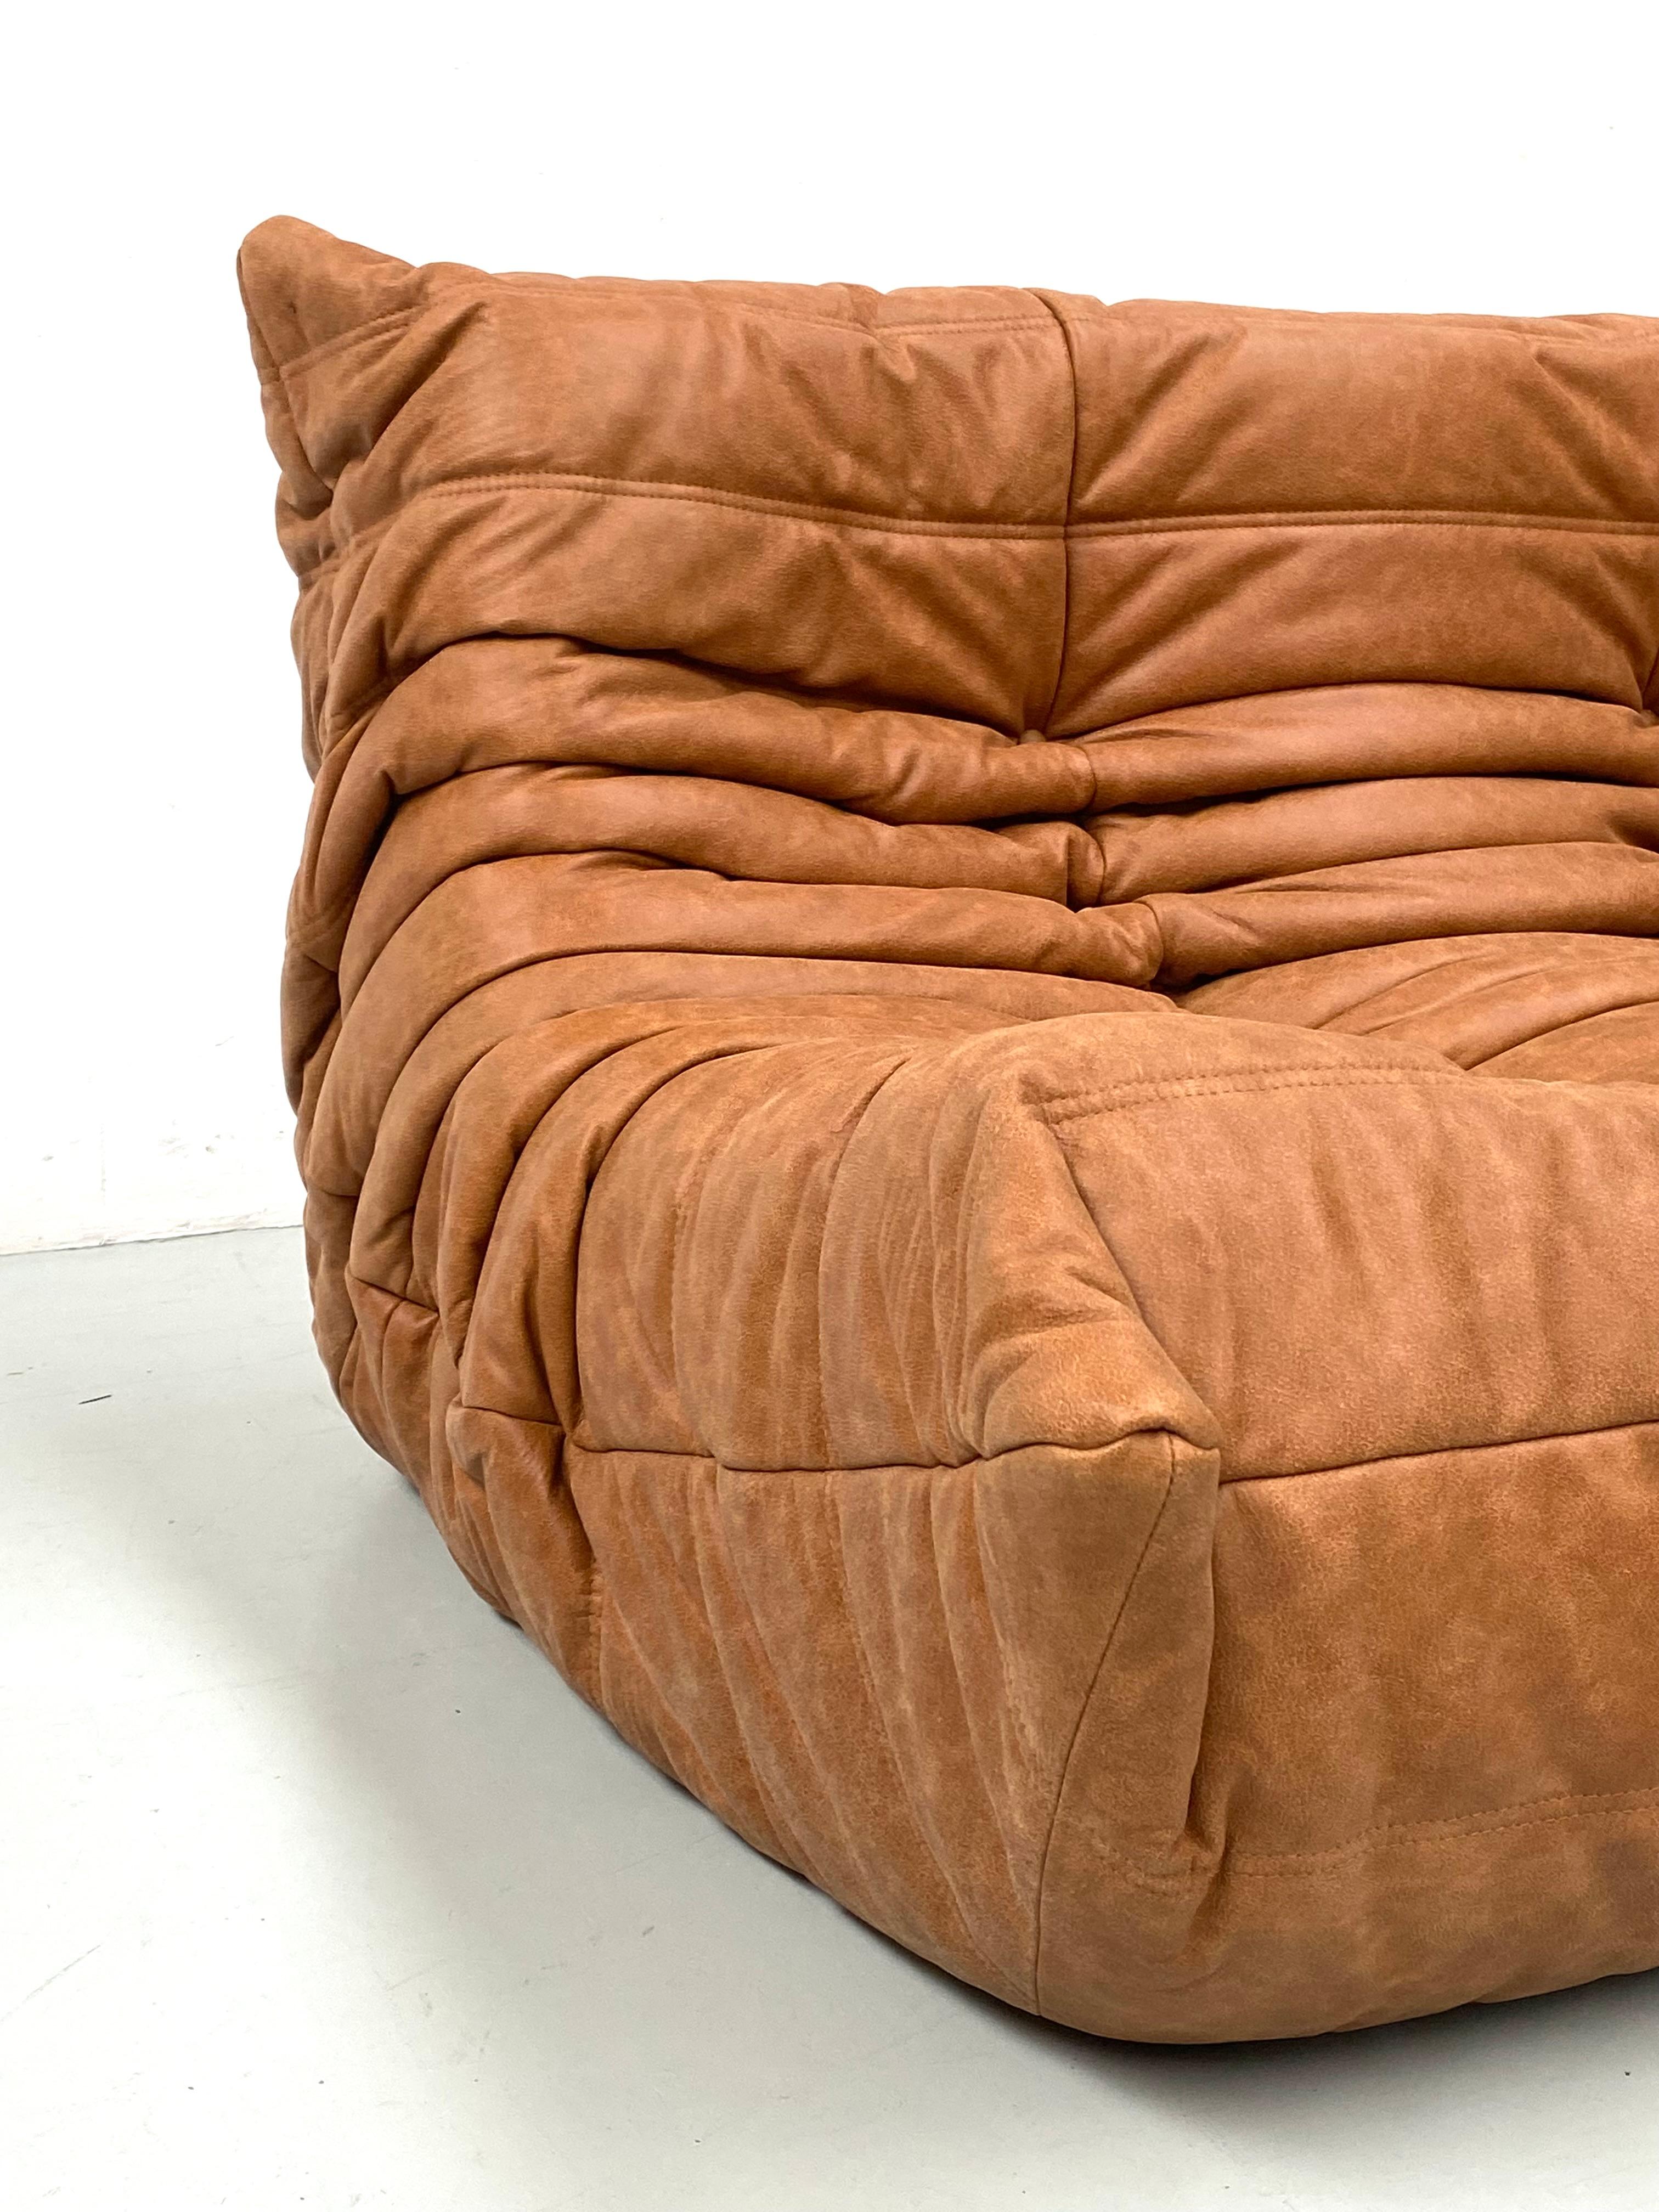 20th Century Vintage French Togo Sofa in Cognac Leather by M. Ducaroy for Ligne Roset, 1970s